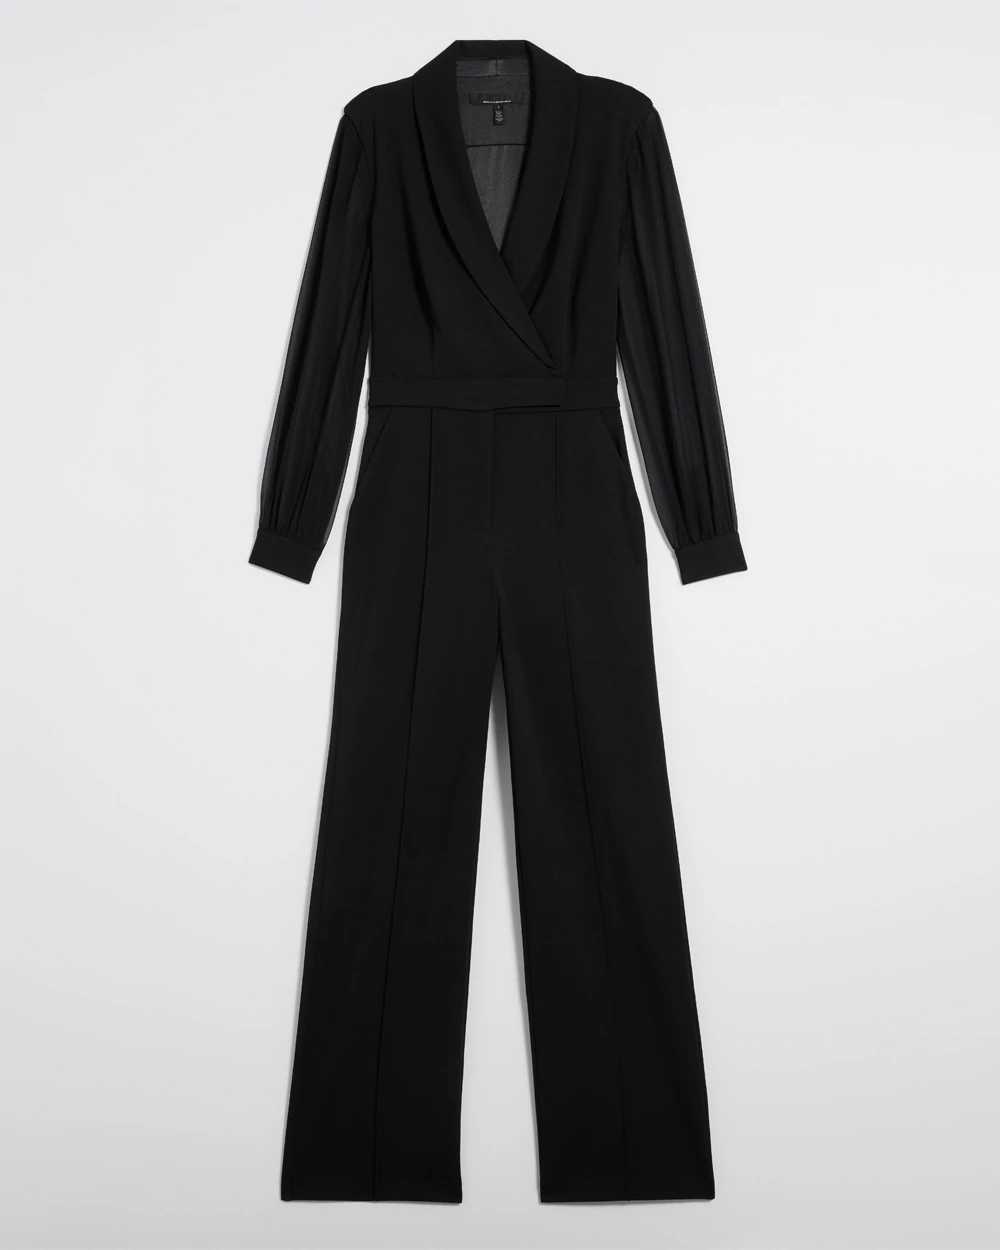 Petite Long Sleeve Sheer Sleeveless Jumpsuit click to view larger image.